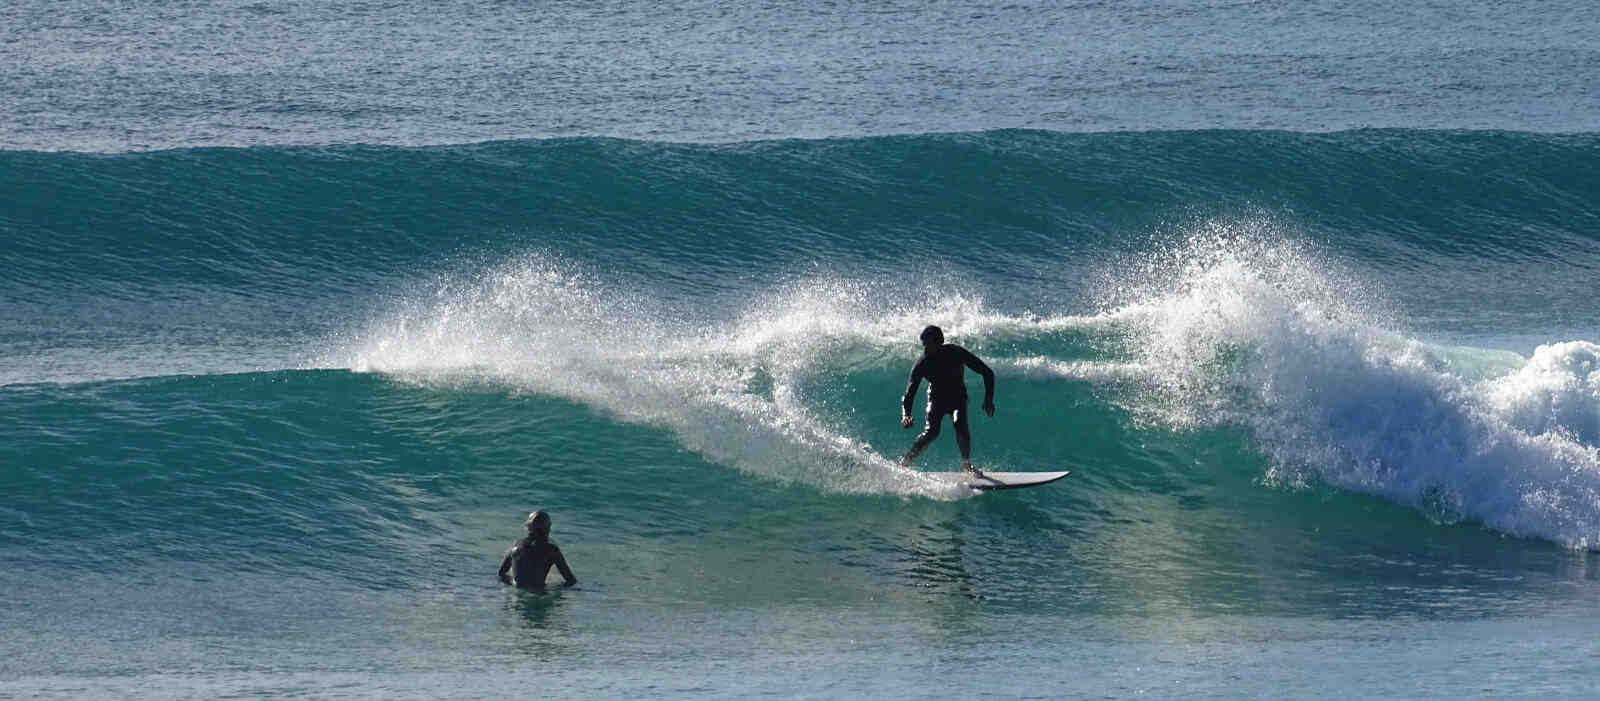 Is a 7 foot surfboard good for beginners?